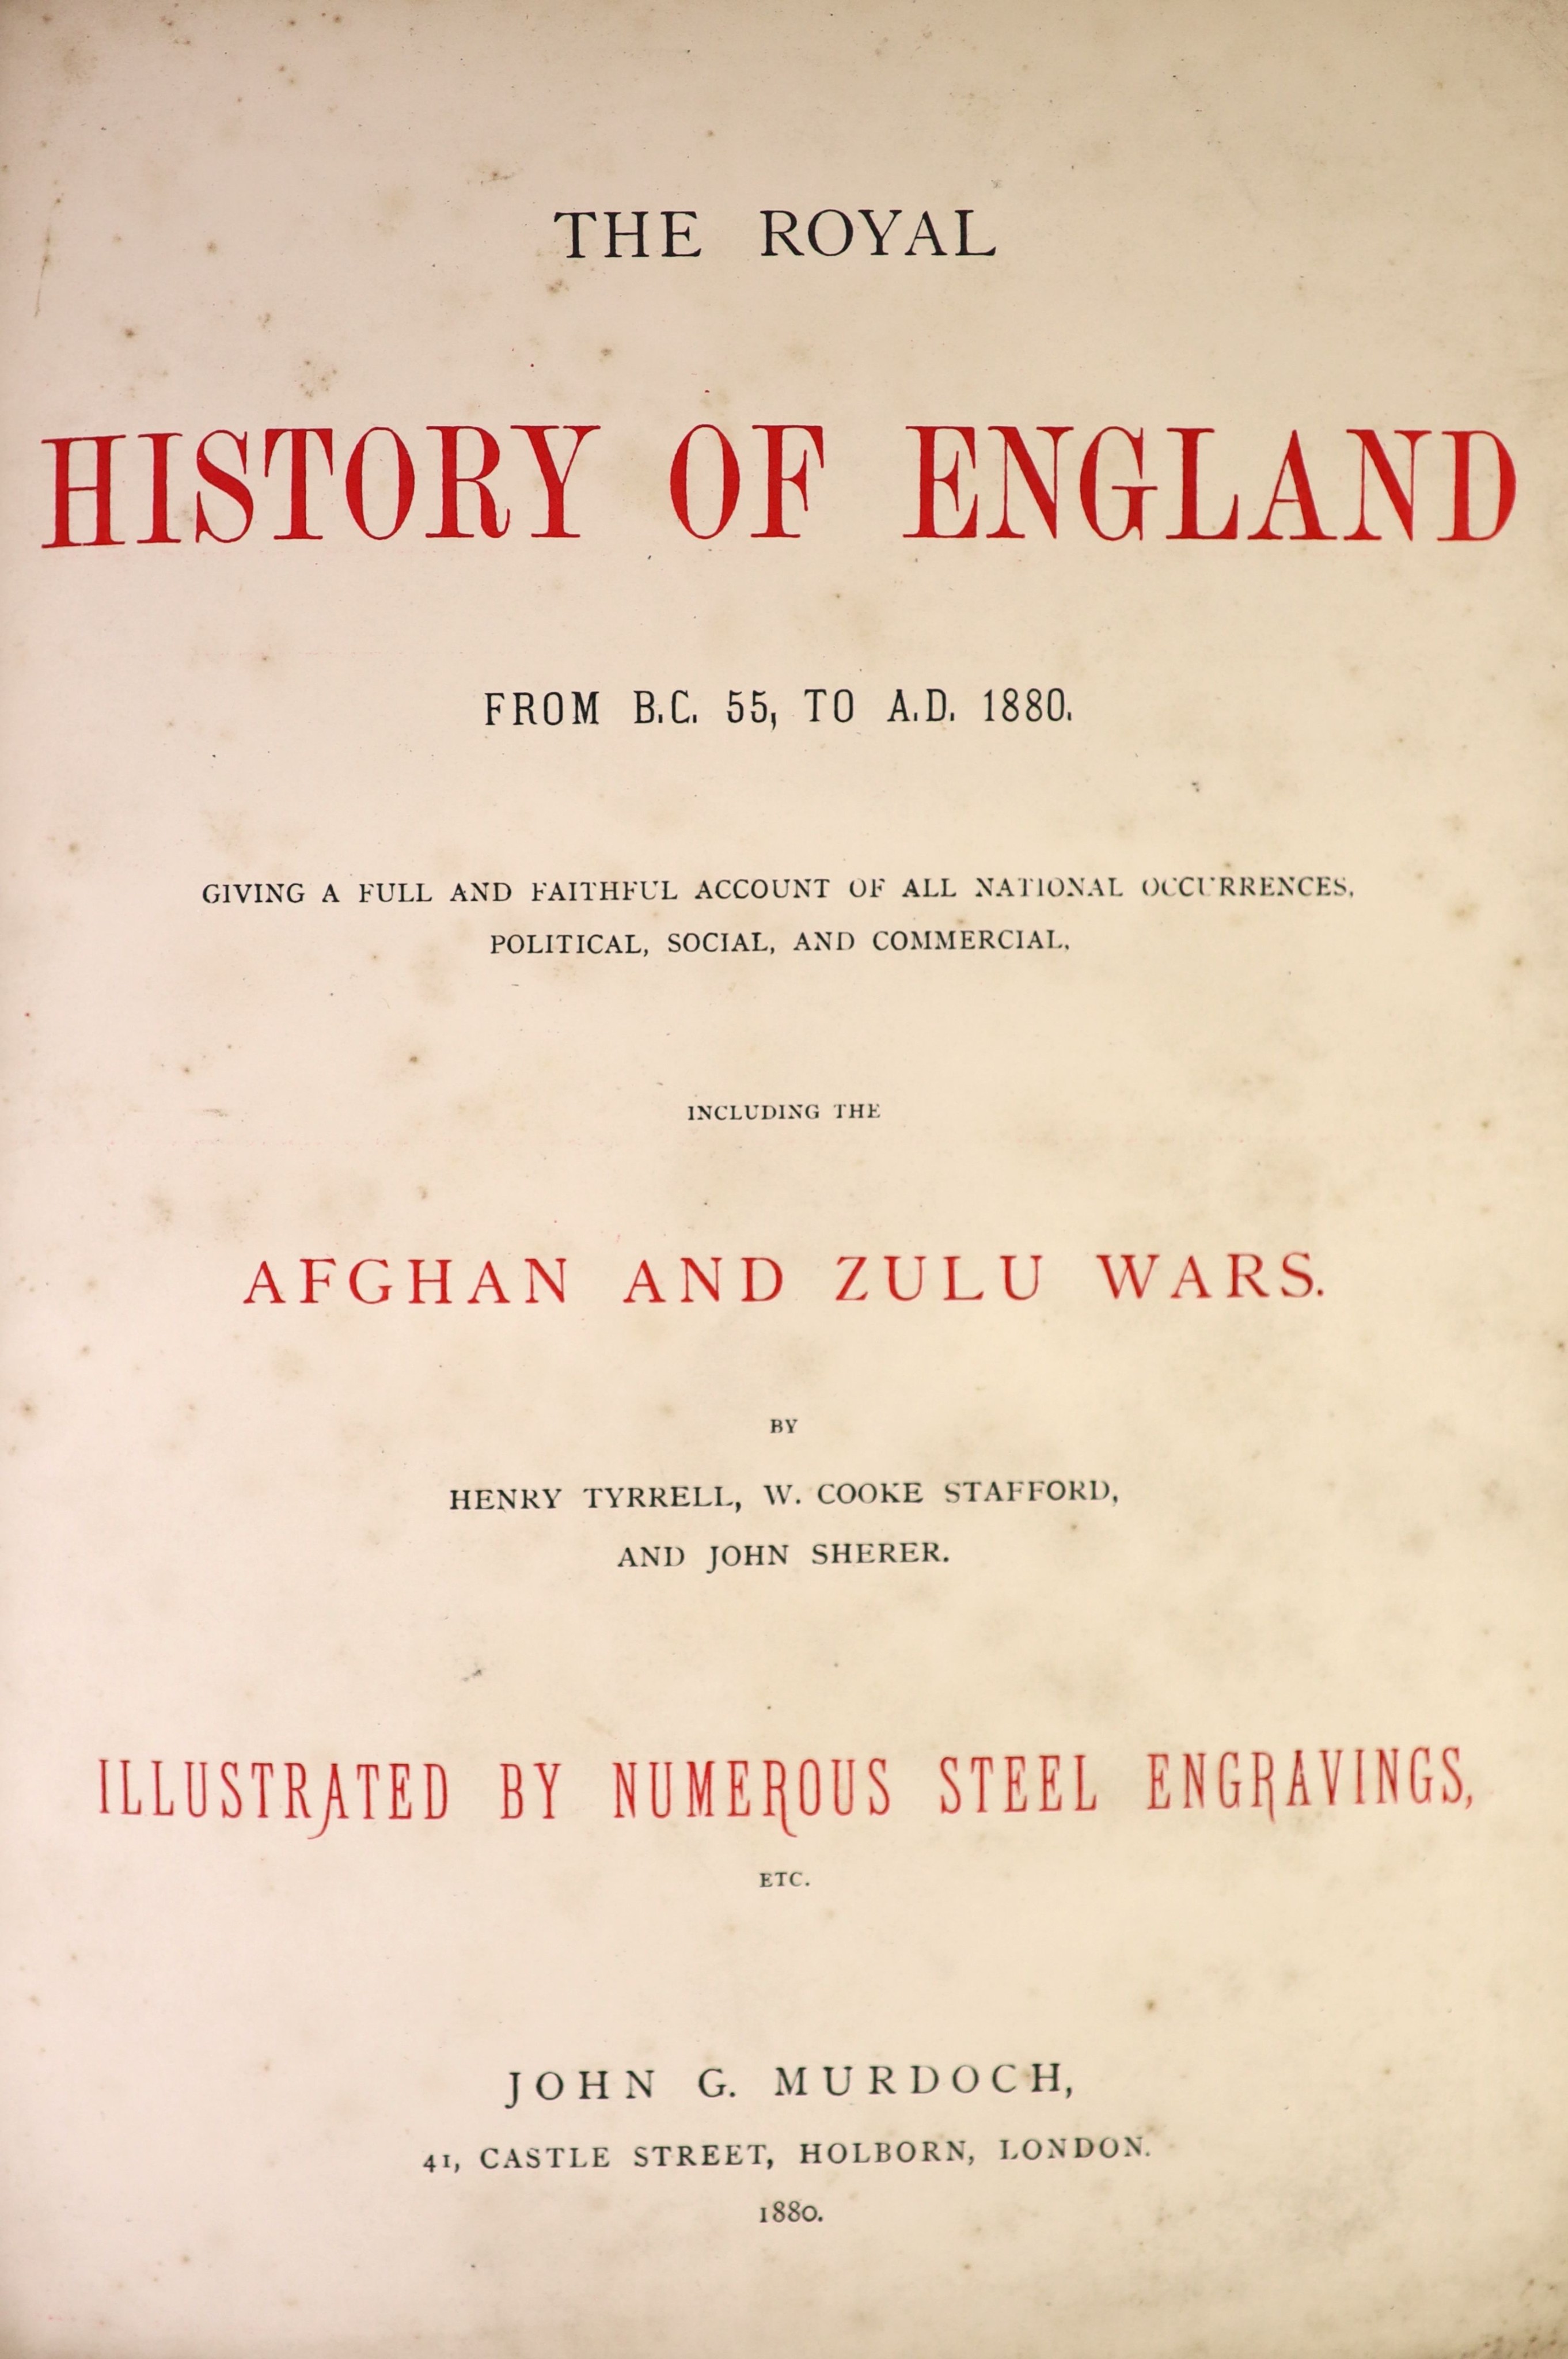 Tyrell, Henry (And others) - The Royal History of England from B.C. 55, to A.D. 1880… Including the Afghan and Zulu Wars. Complete with 27 engraved plates. Red and black title page, historiated throughout. Embossed half